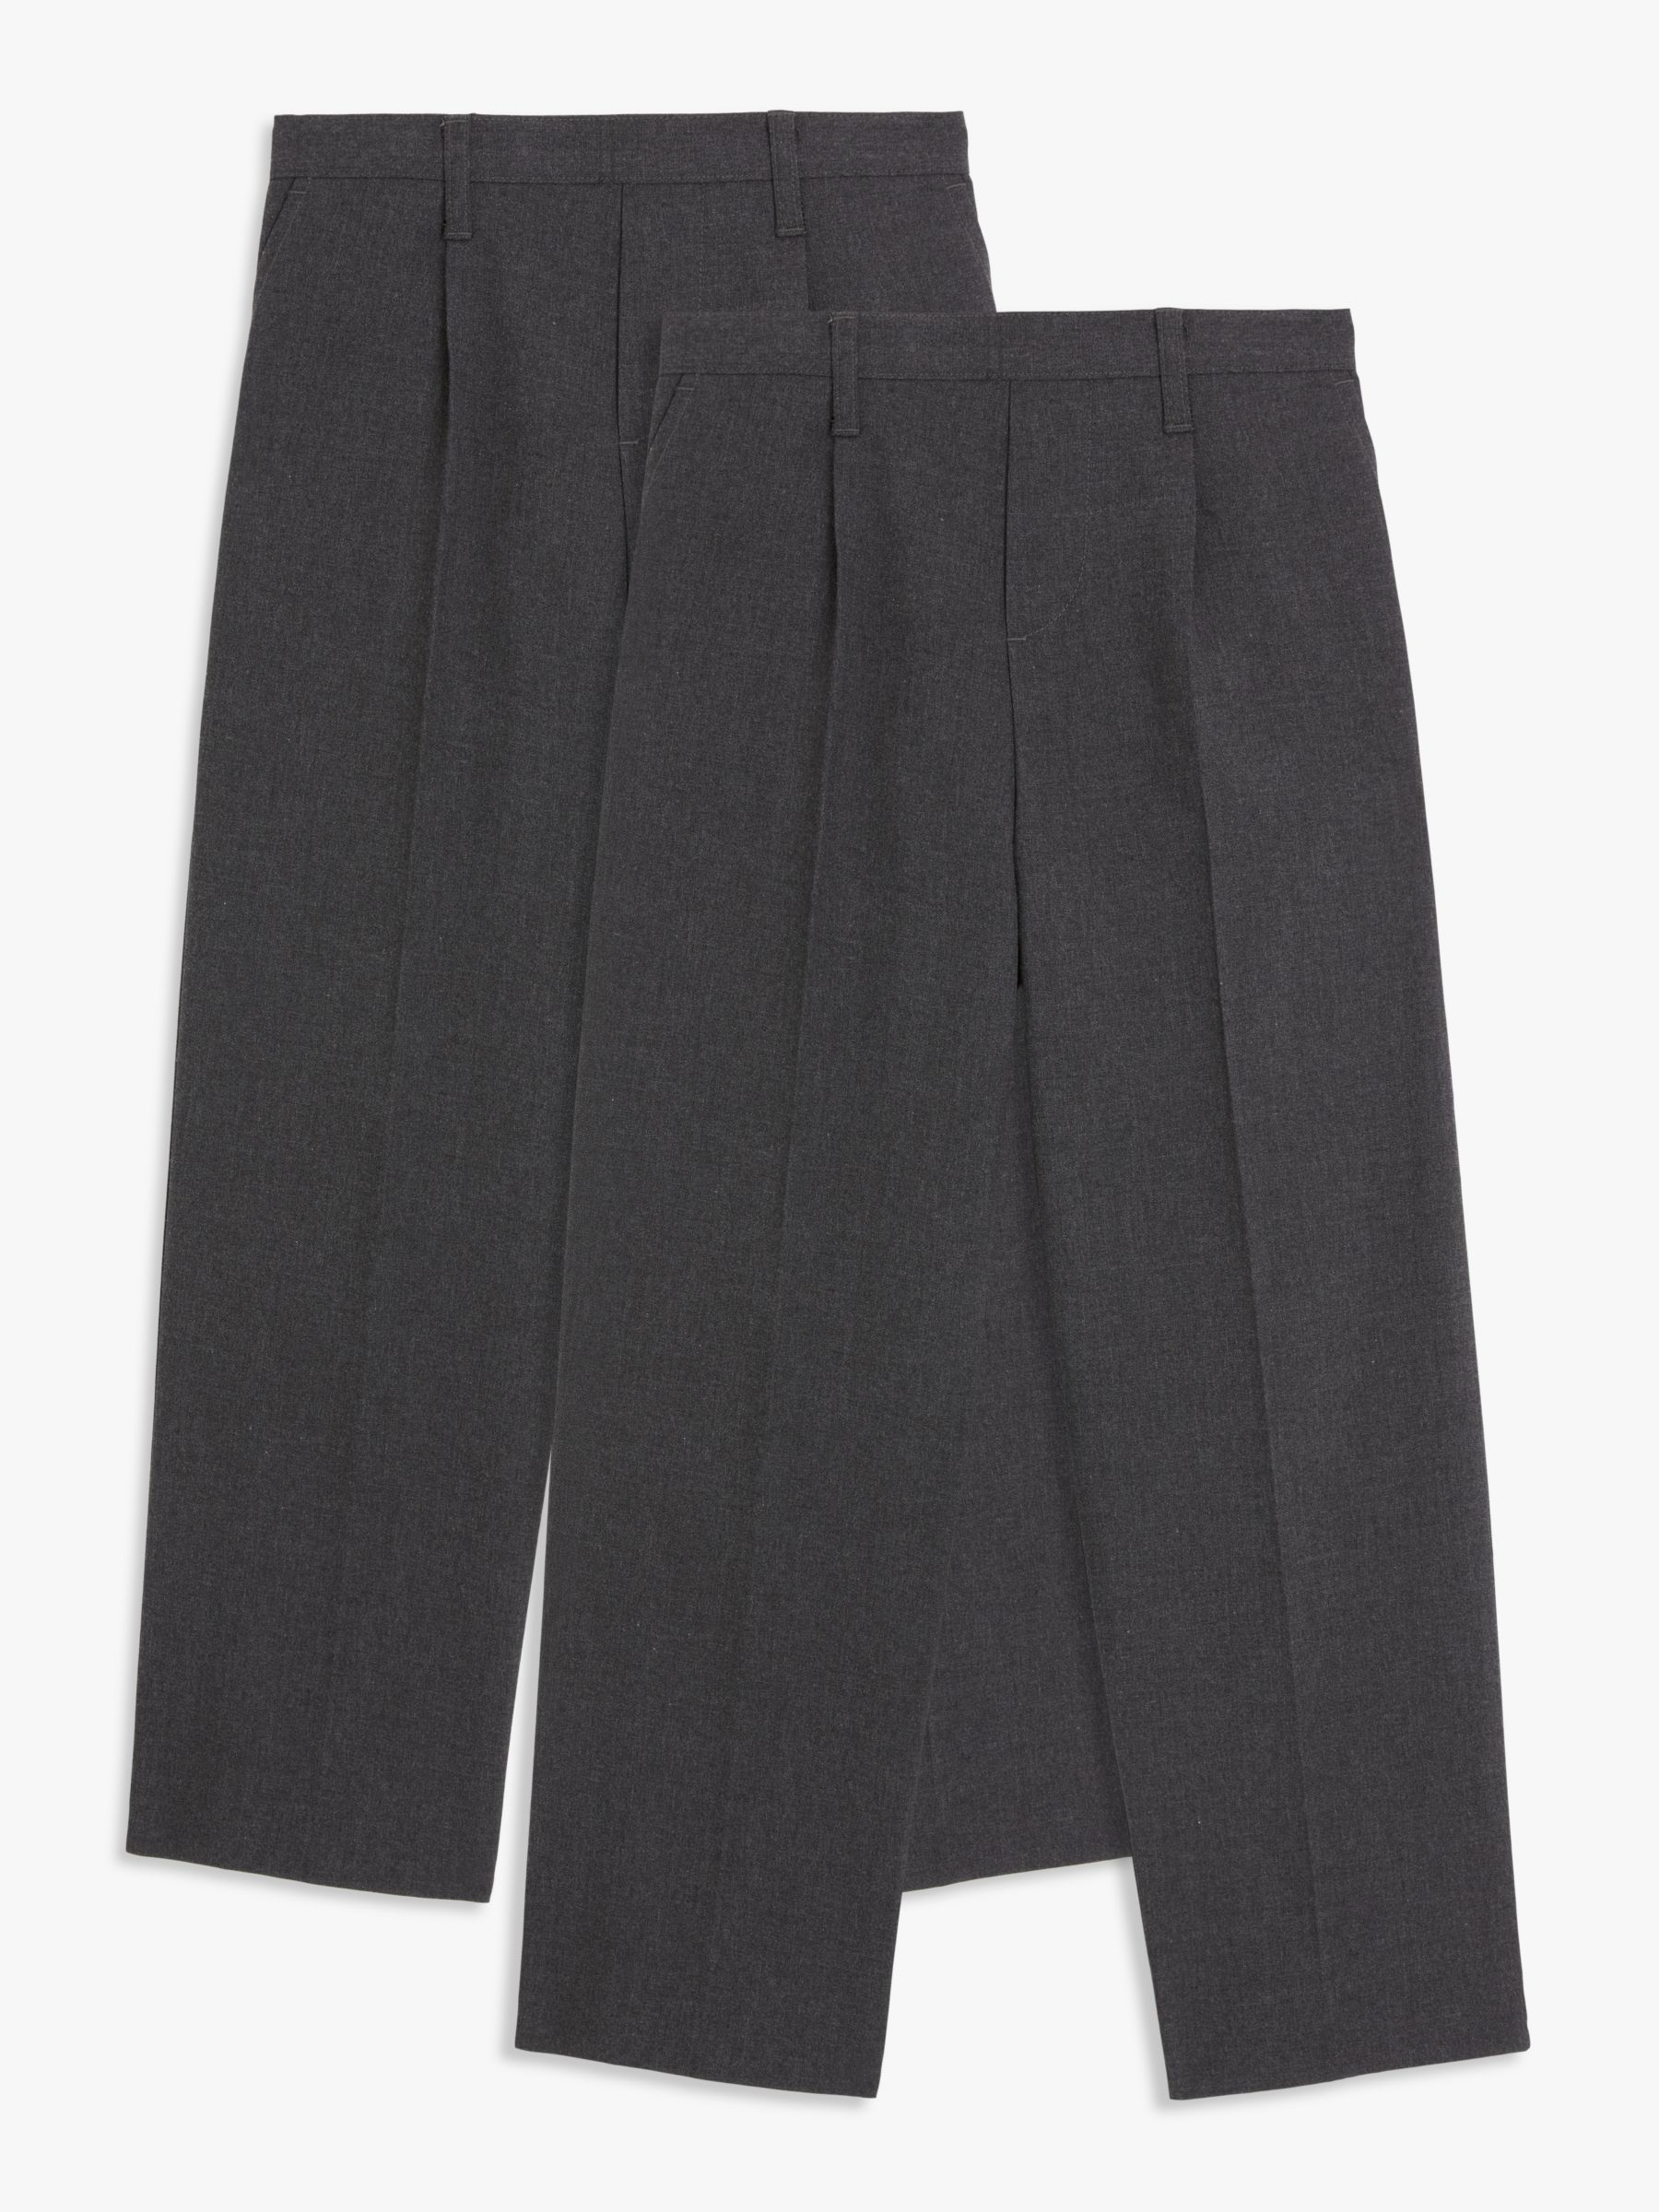 JOHN LEWIS ANYDAY Pants, Pack of 3 in Black/White/Grey